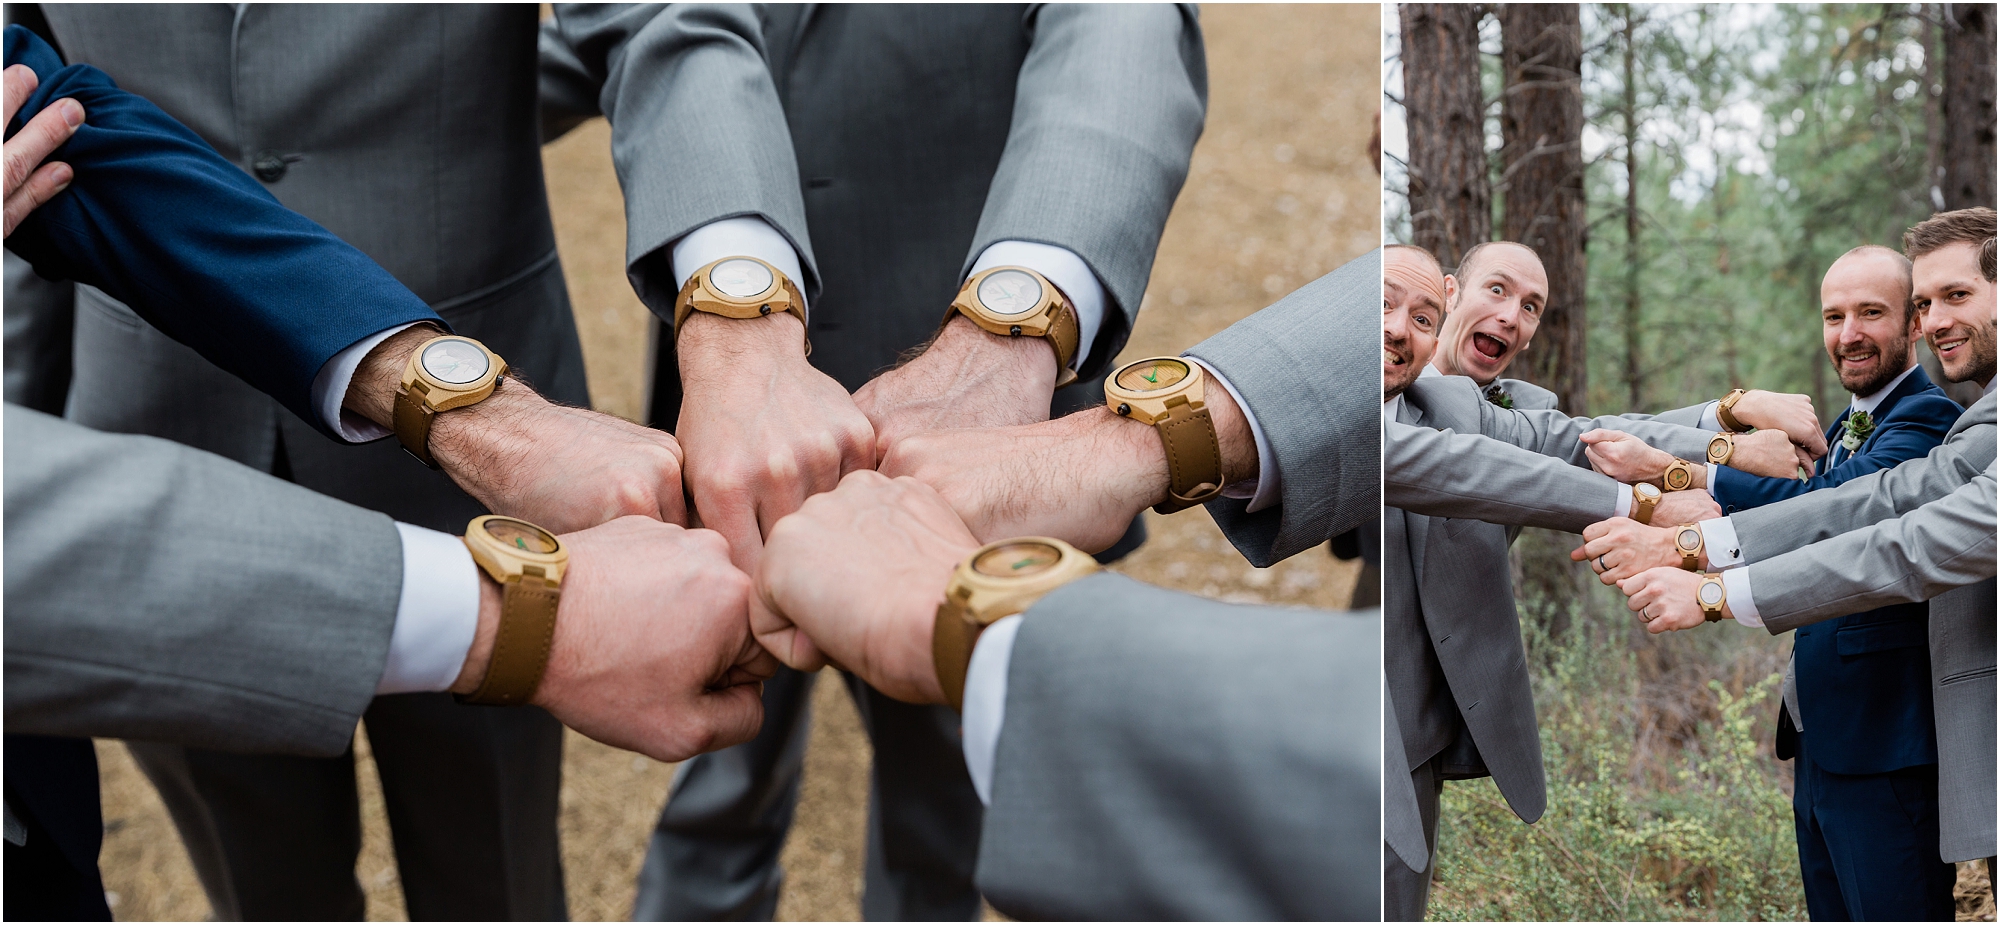 The groom gifted his groomsmen handmade wooden watches for his wedding day gift. | Erica Swantek Photography